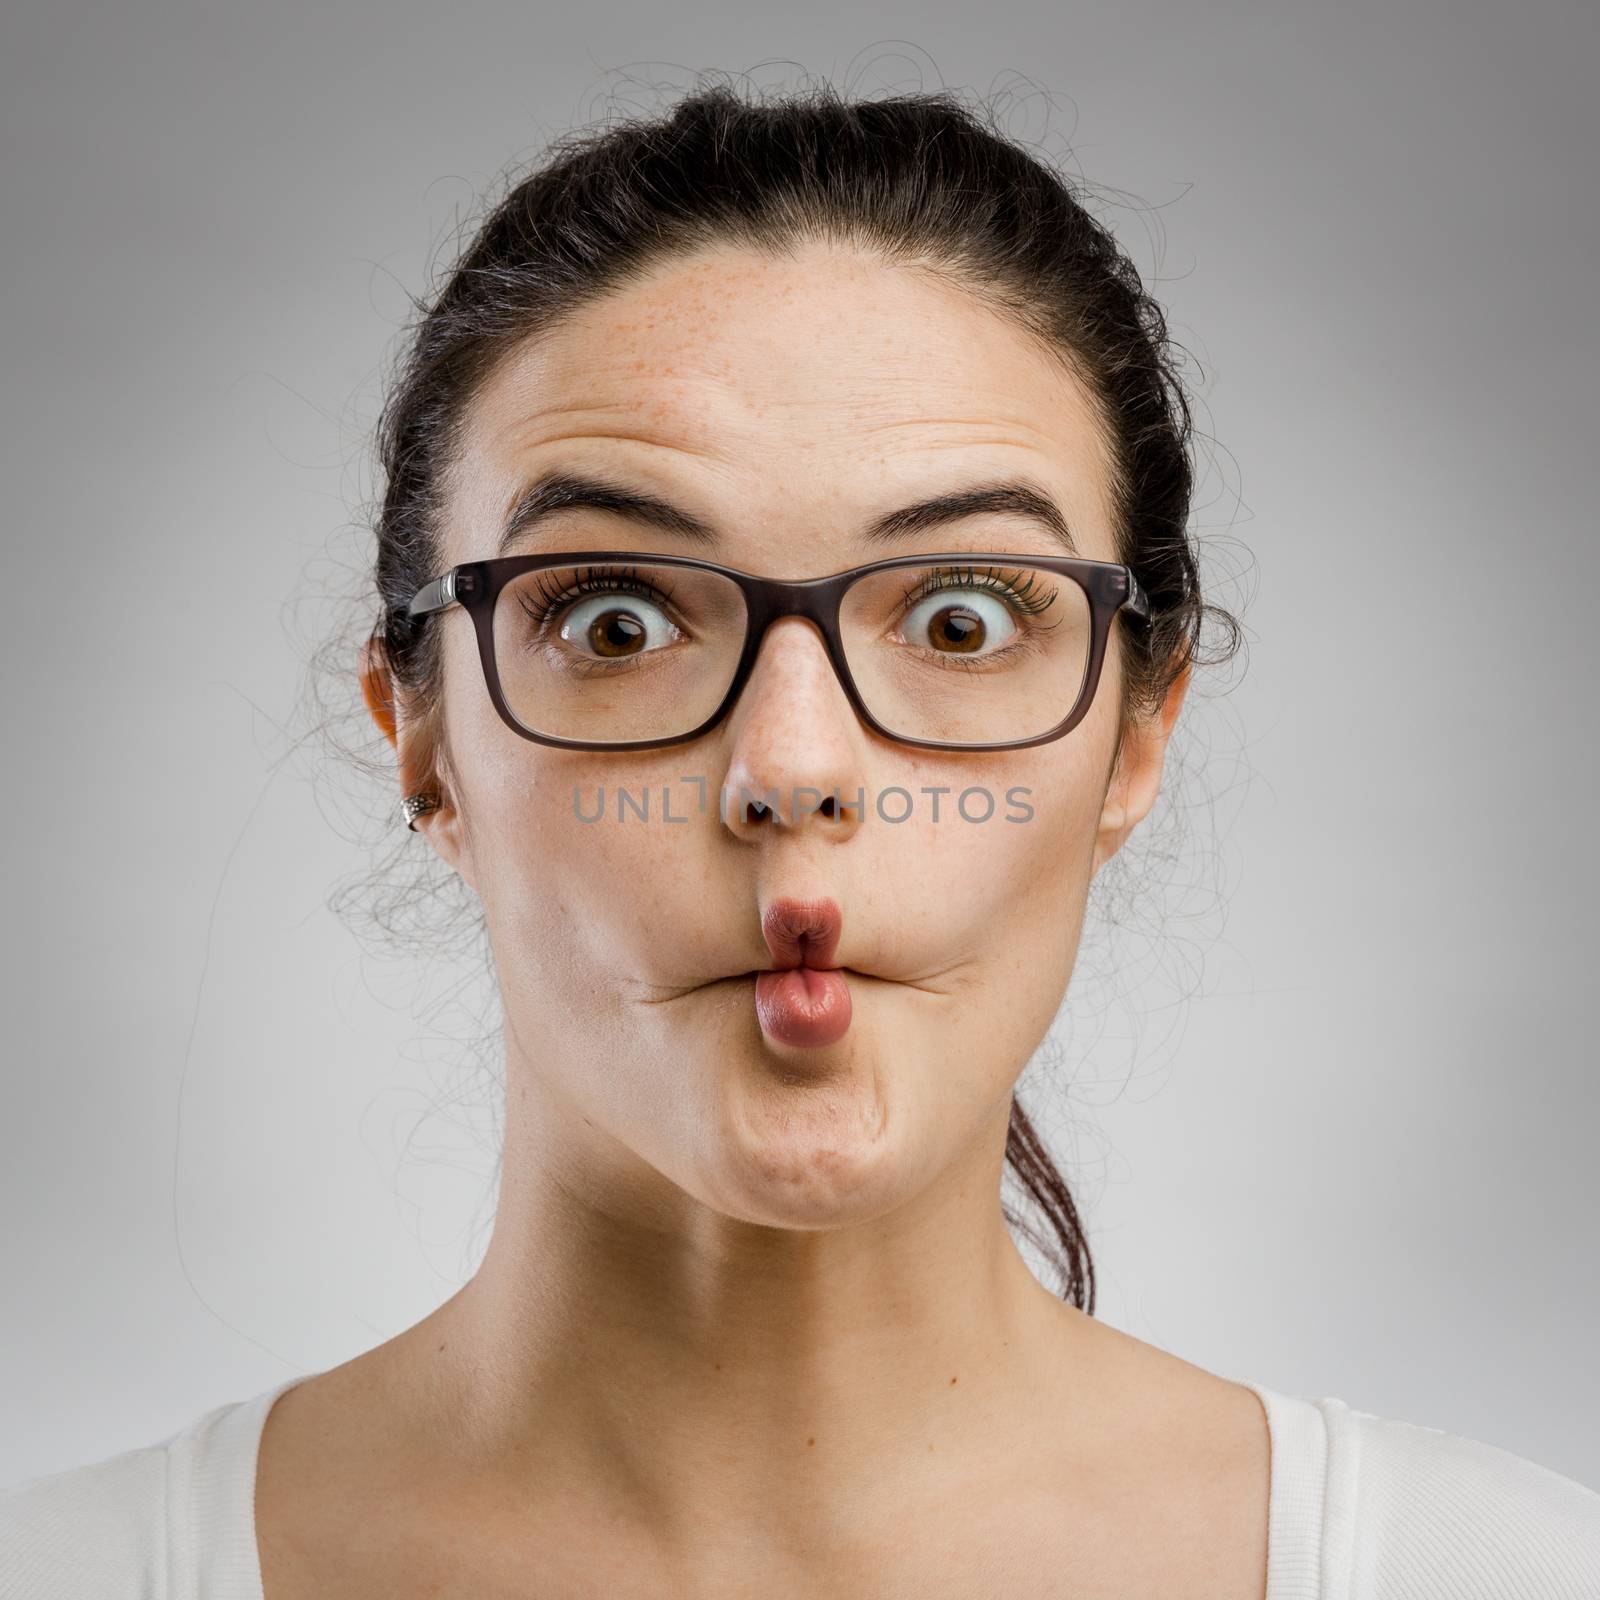 Cute portrait of a woman making a silly face